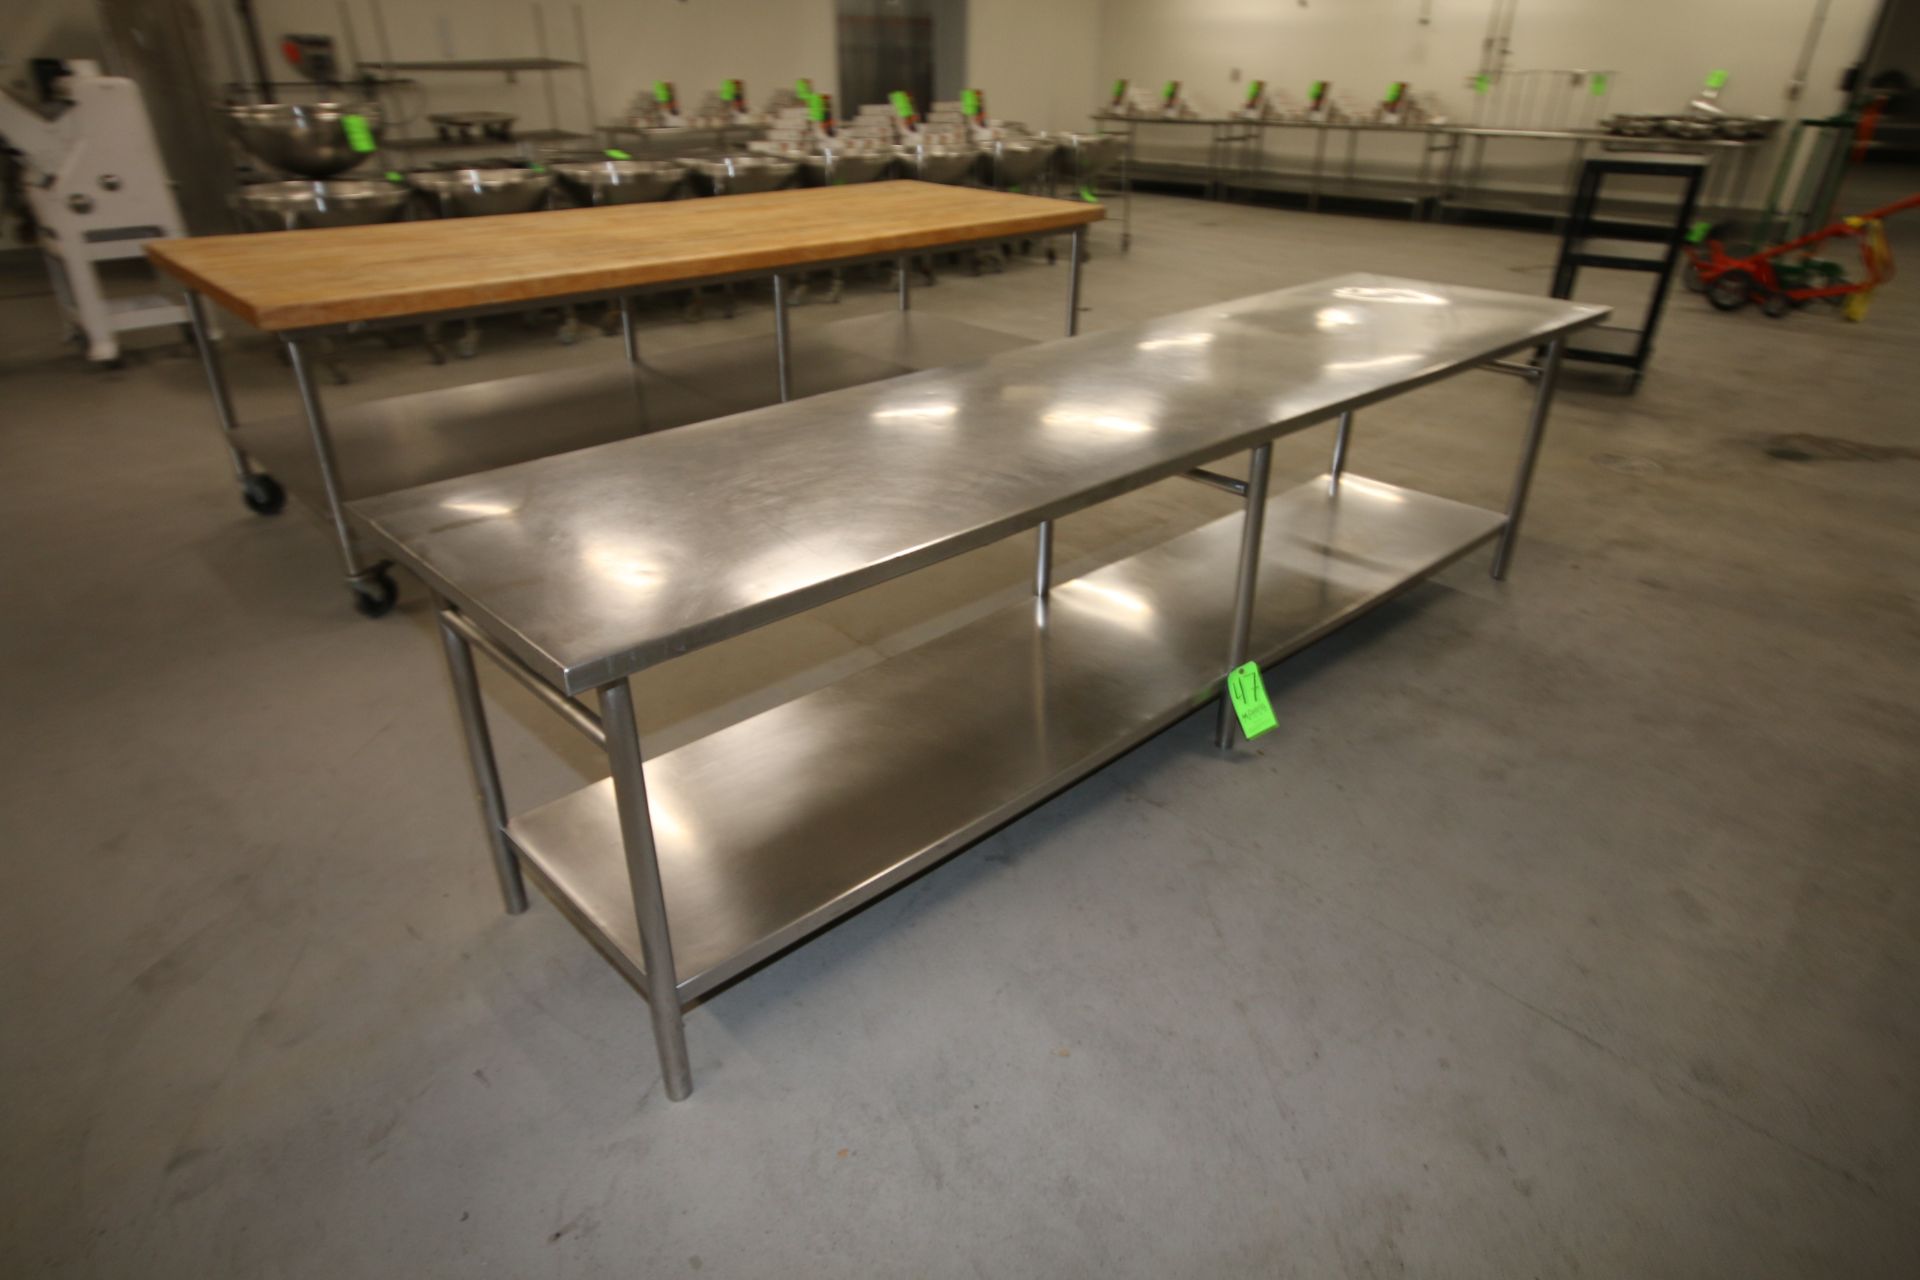 S/S Table, with S/S Bottom Shelf, Overall Dims.: 10' L x 30" W x 32" H